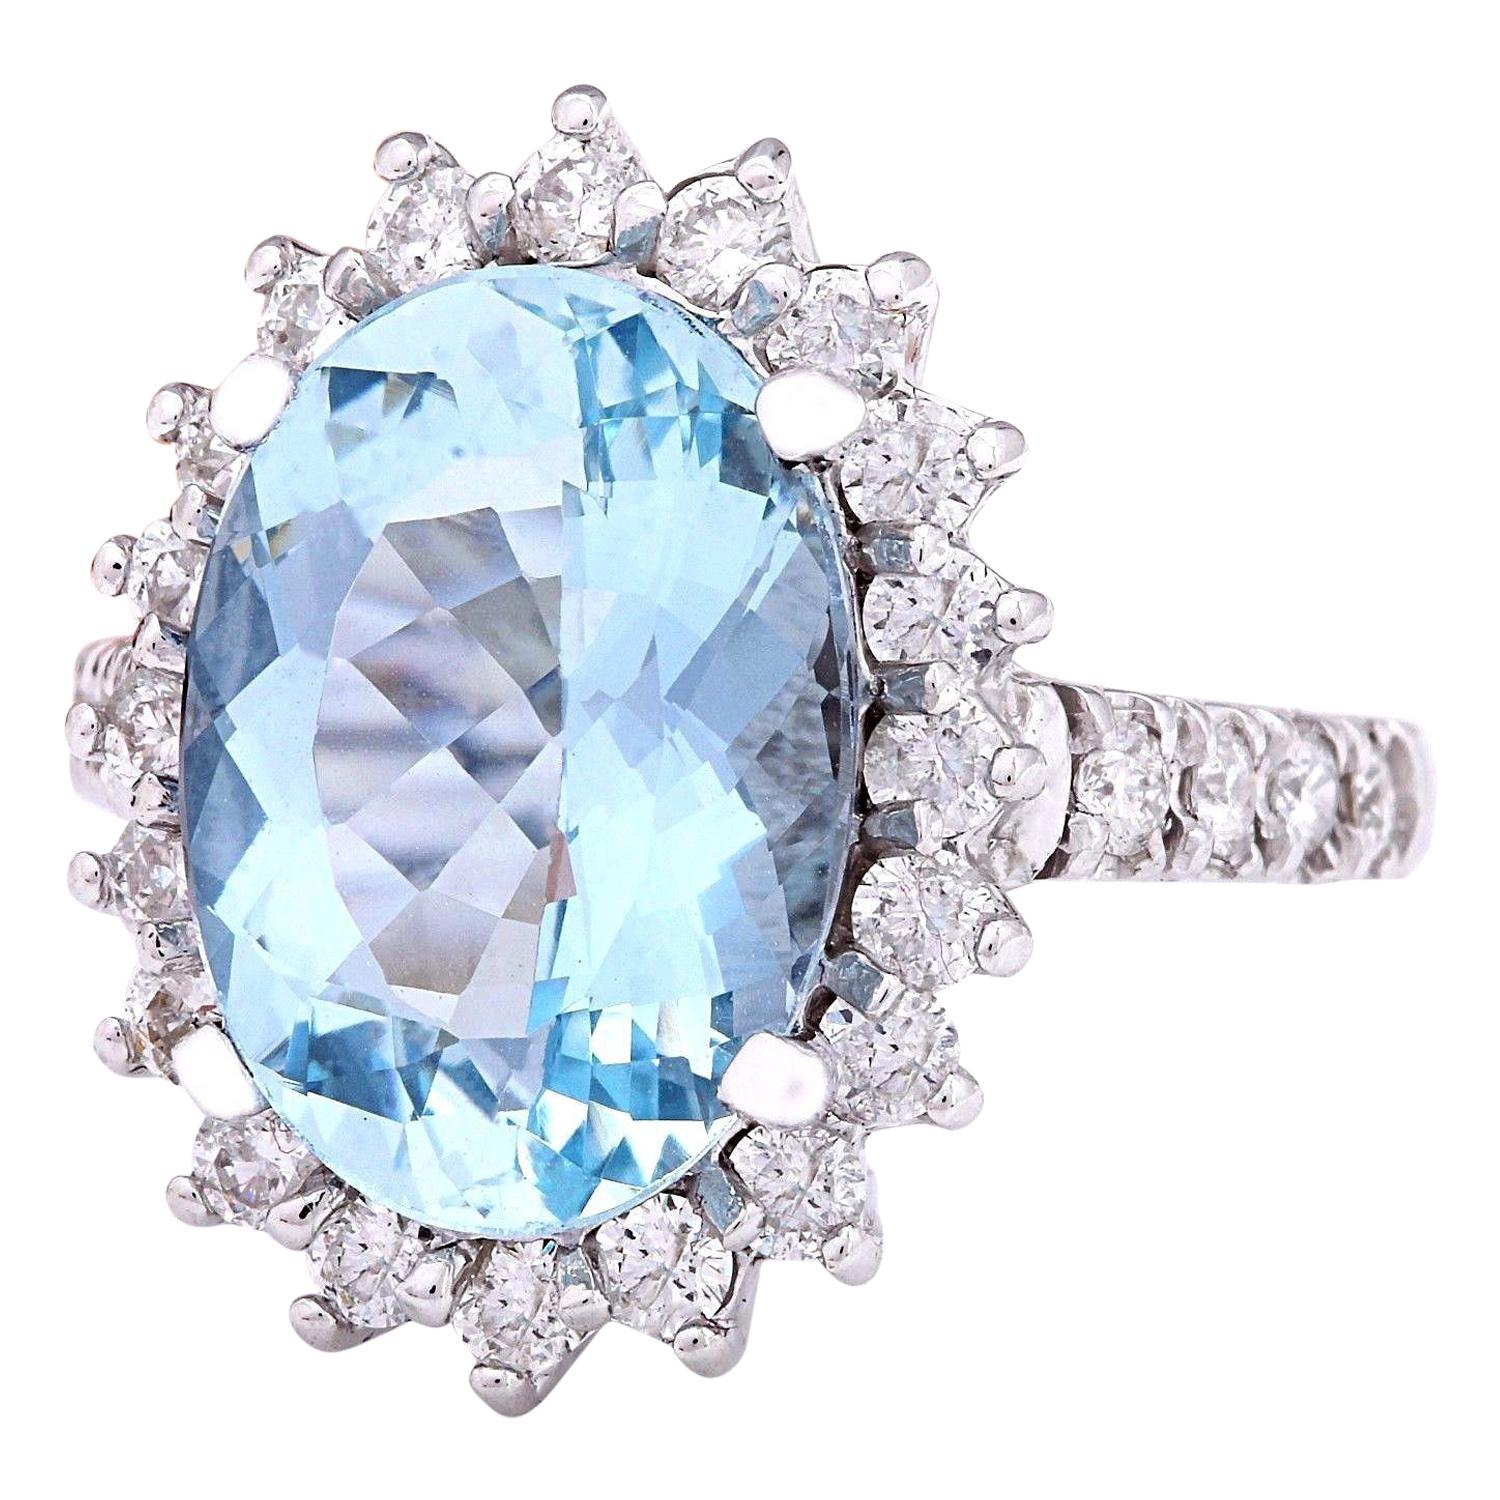 Introducing our exquisite 6.10 Carat Natural Aquamarine 14K Solid White Gold Diamond Ring:
Crafted from lustrous 14K White Gold, this captivating ring features a magnificent 5.10 Carat oval-shaped Aquamarine as its centerpiece, measuring 14.00x10.00